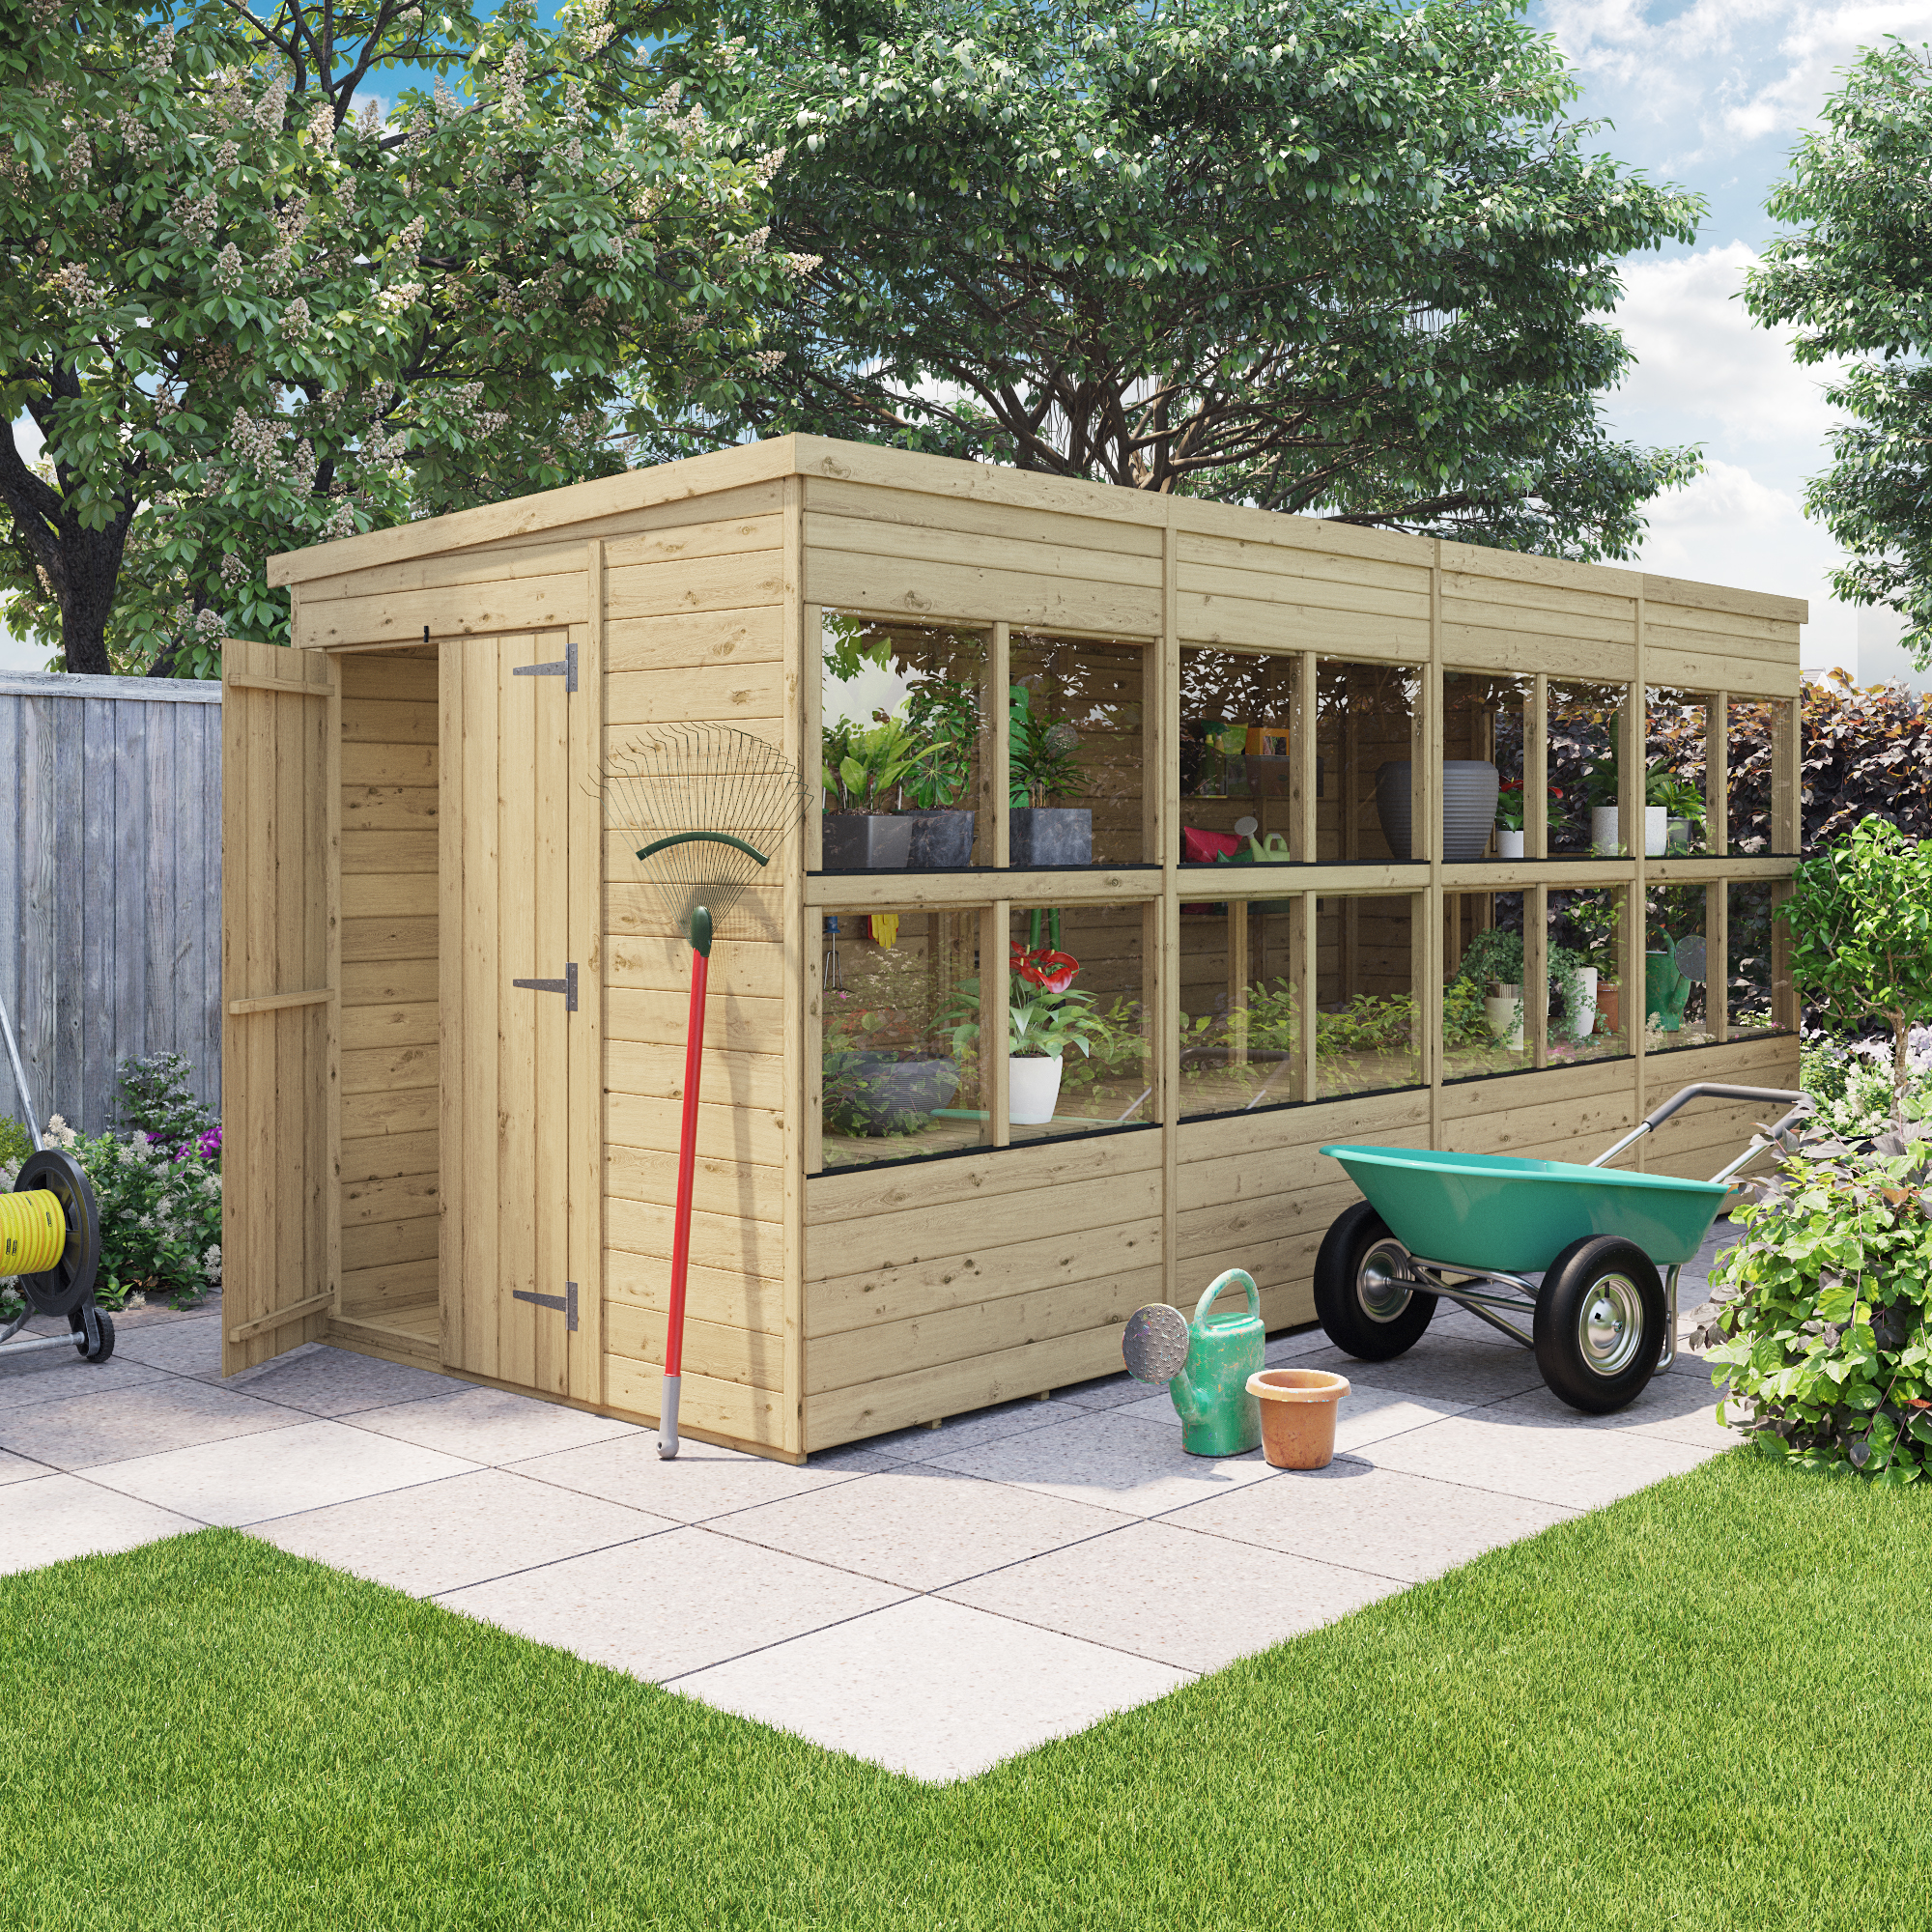 BillyOh Planthouse Tongue and Groove Pent Potting Shed - 16x6